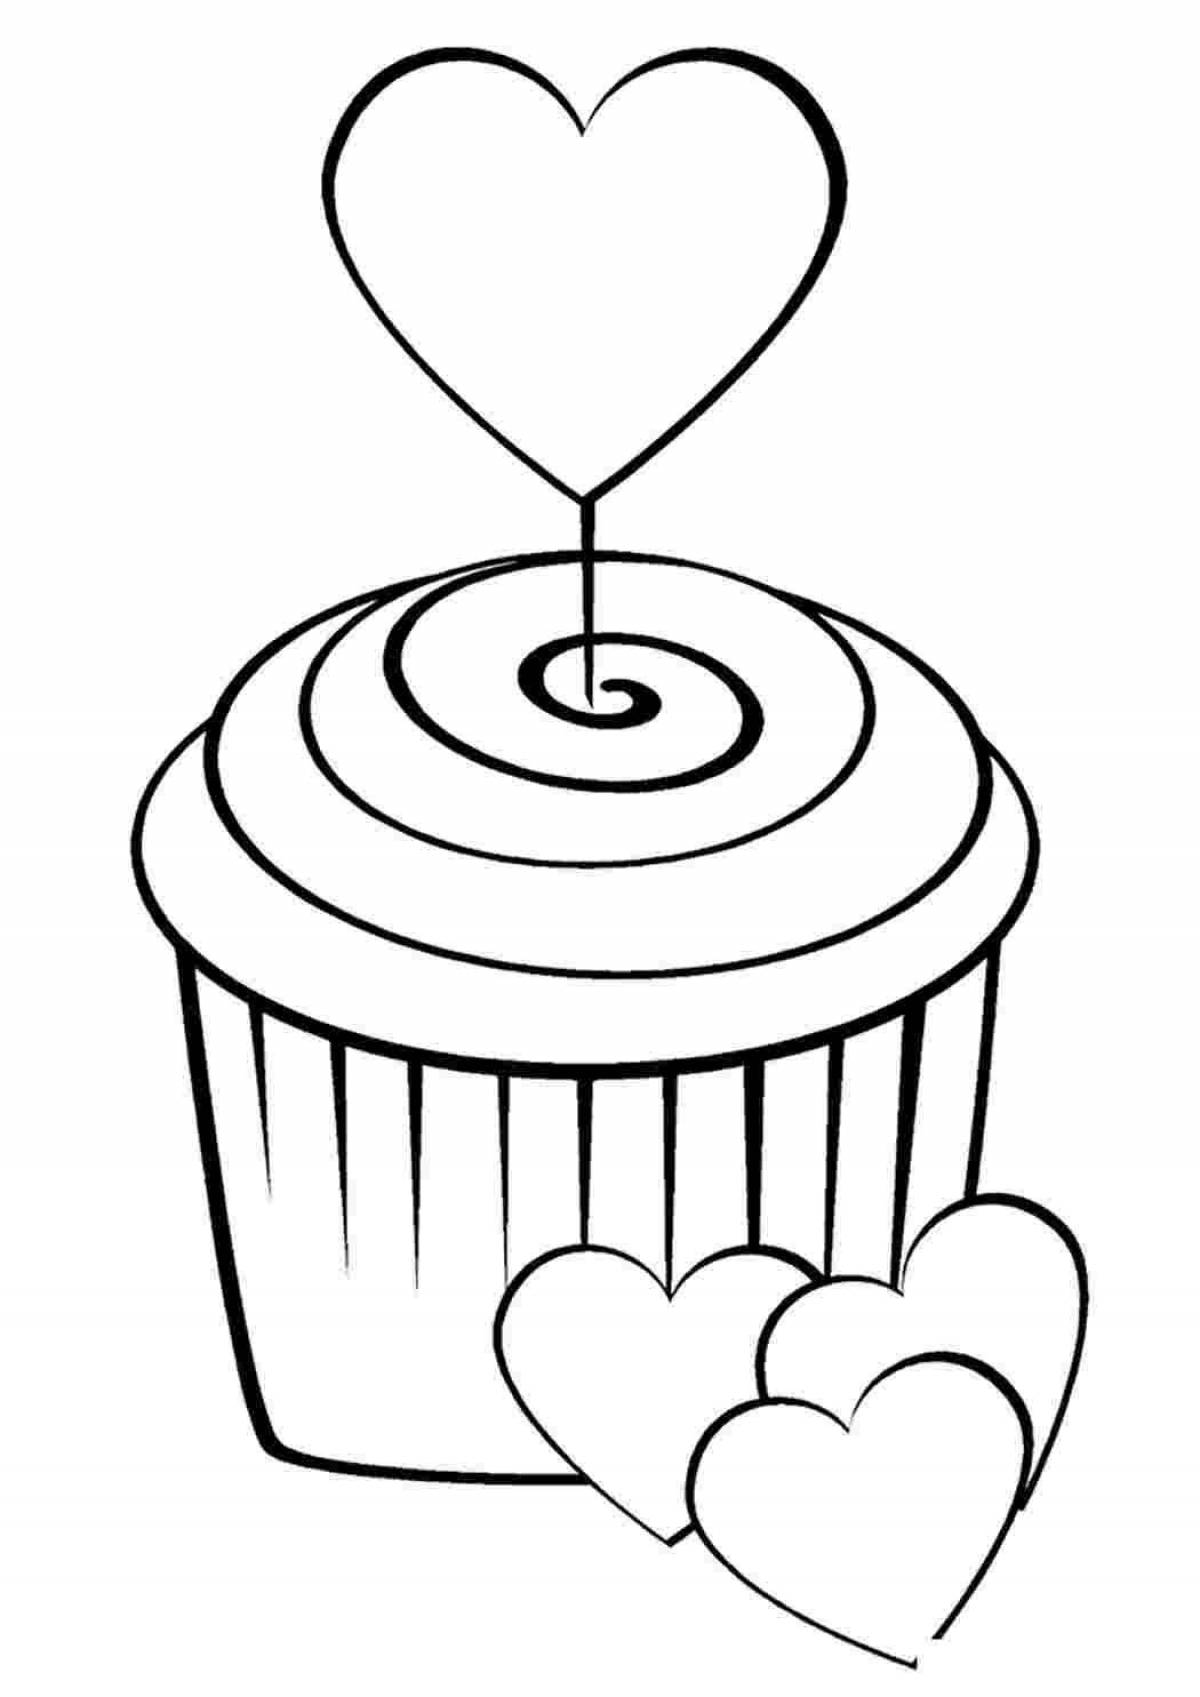 Delicate copy of the coloring page